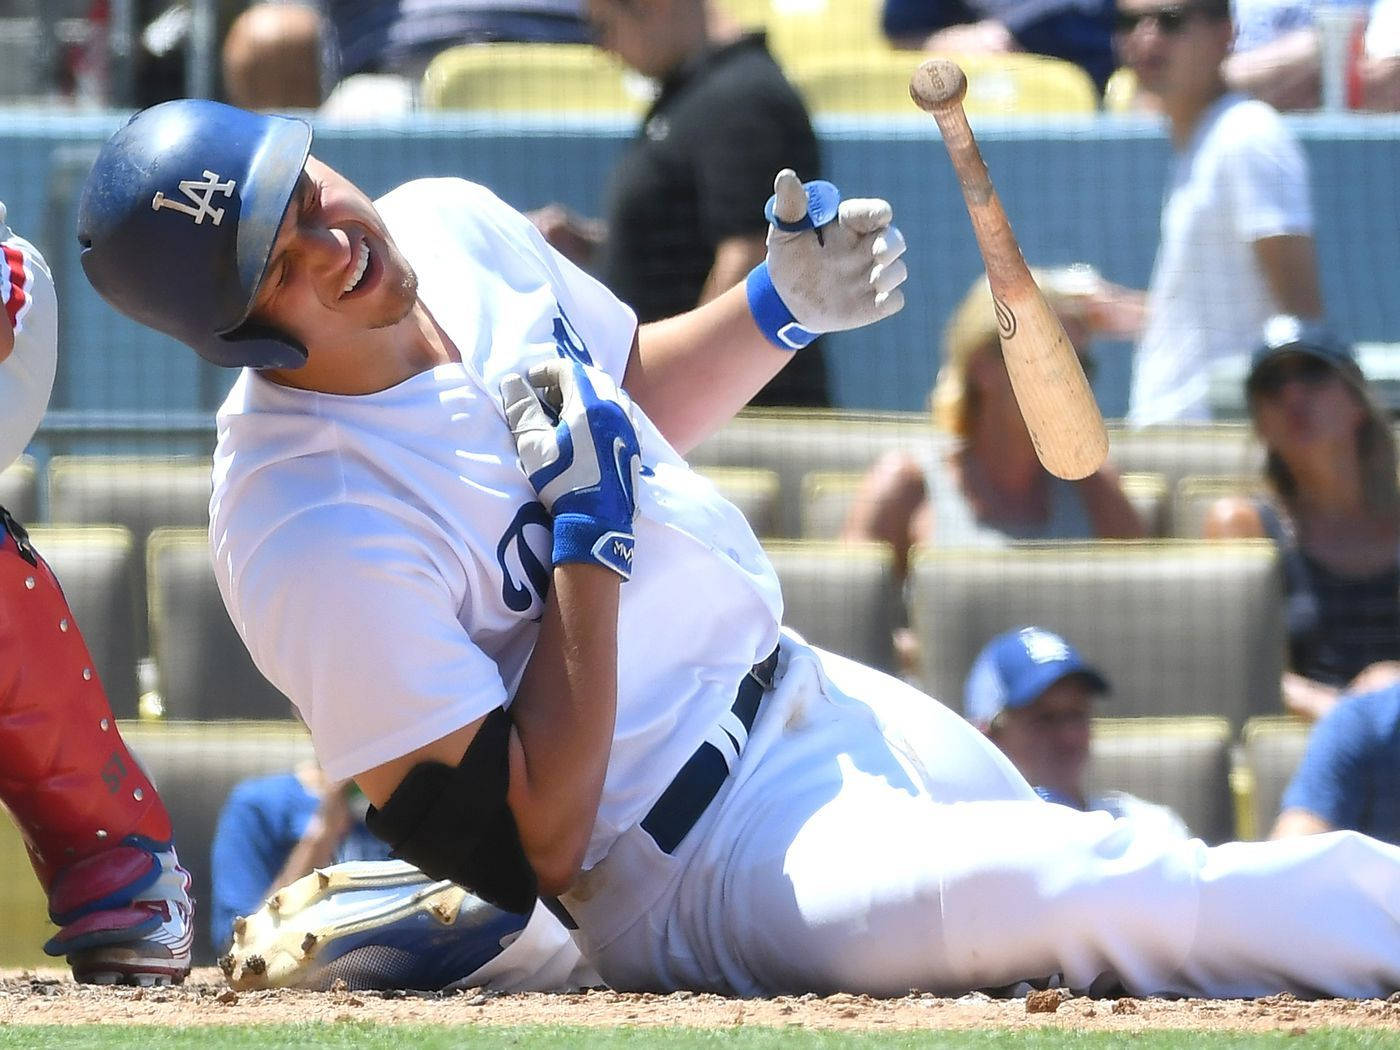 Corey Seager On The Ground Goofing Off